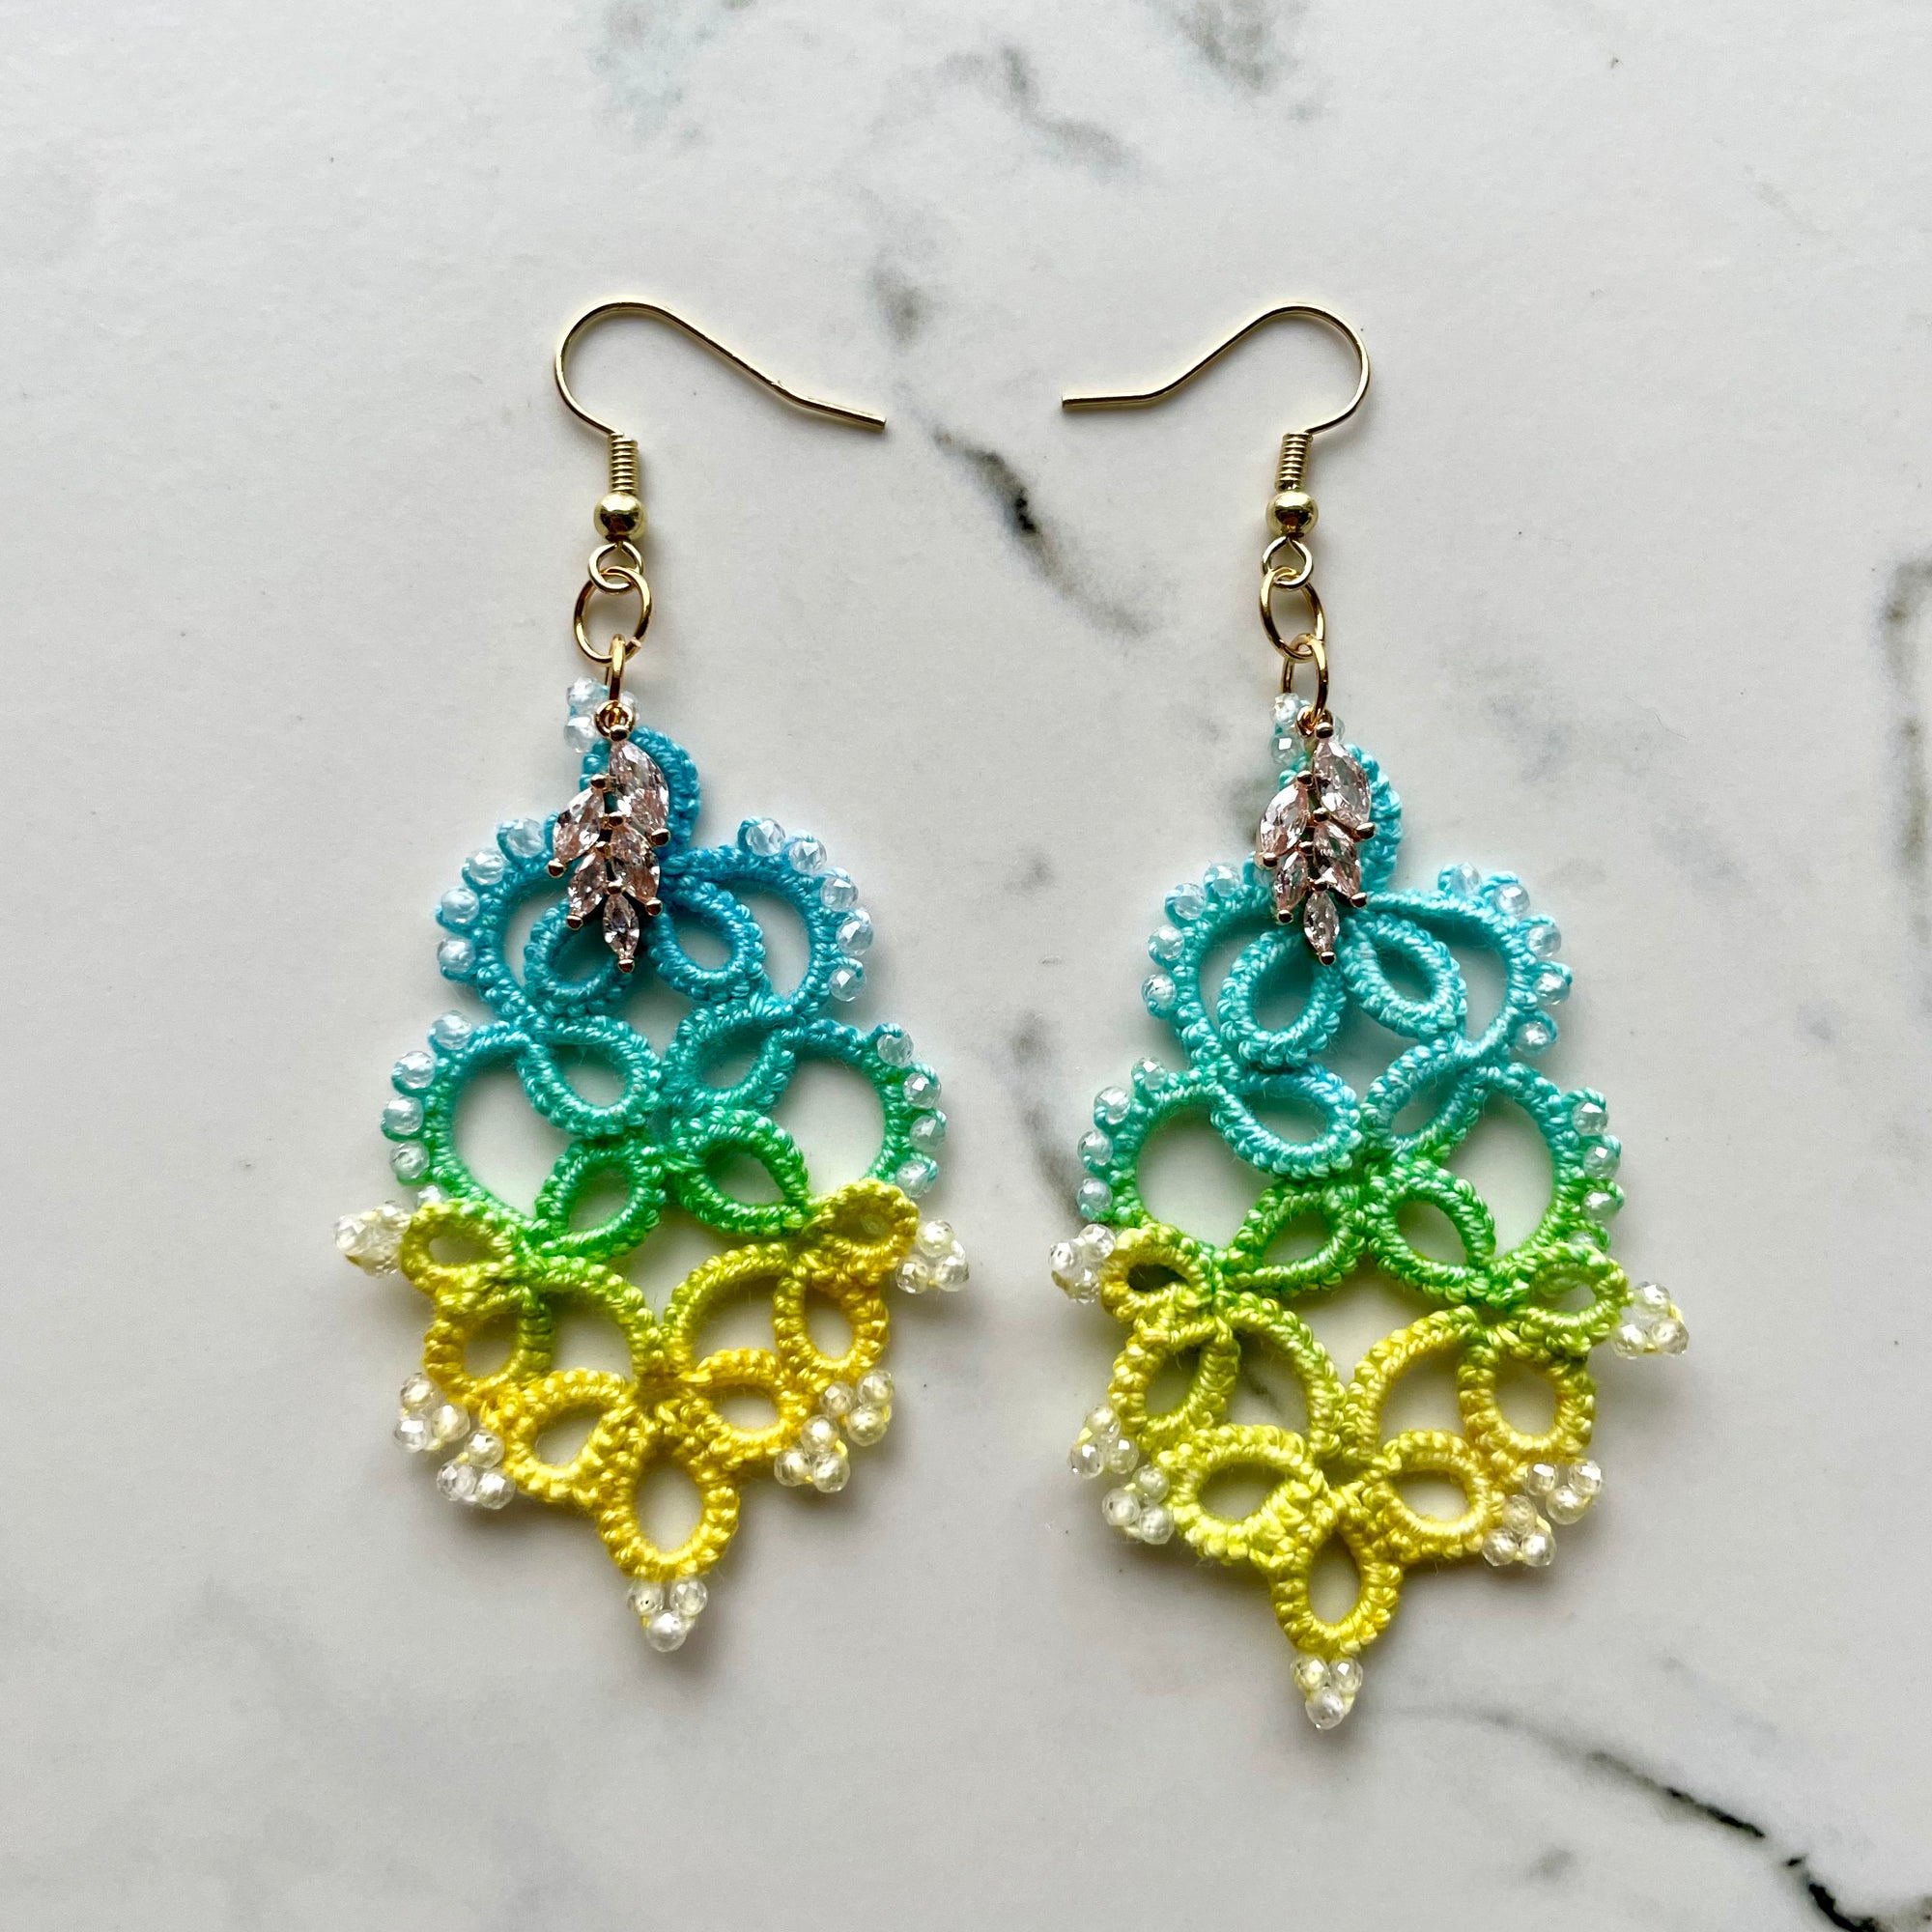 Teal, Green, and Yellow Ombré Tatted Lace Earrings